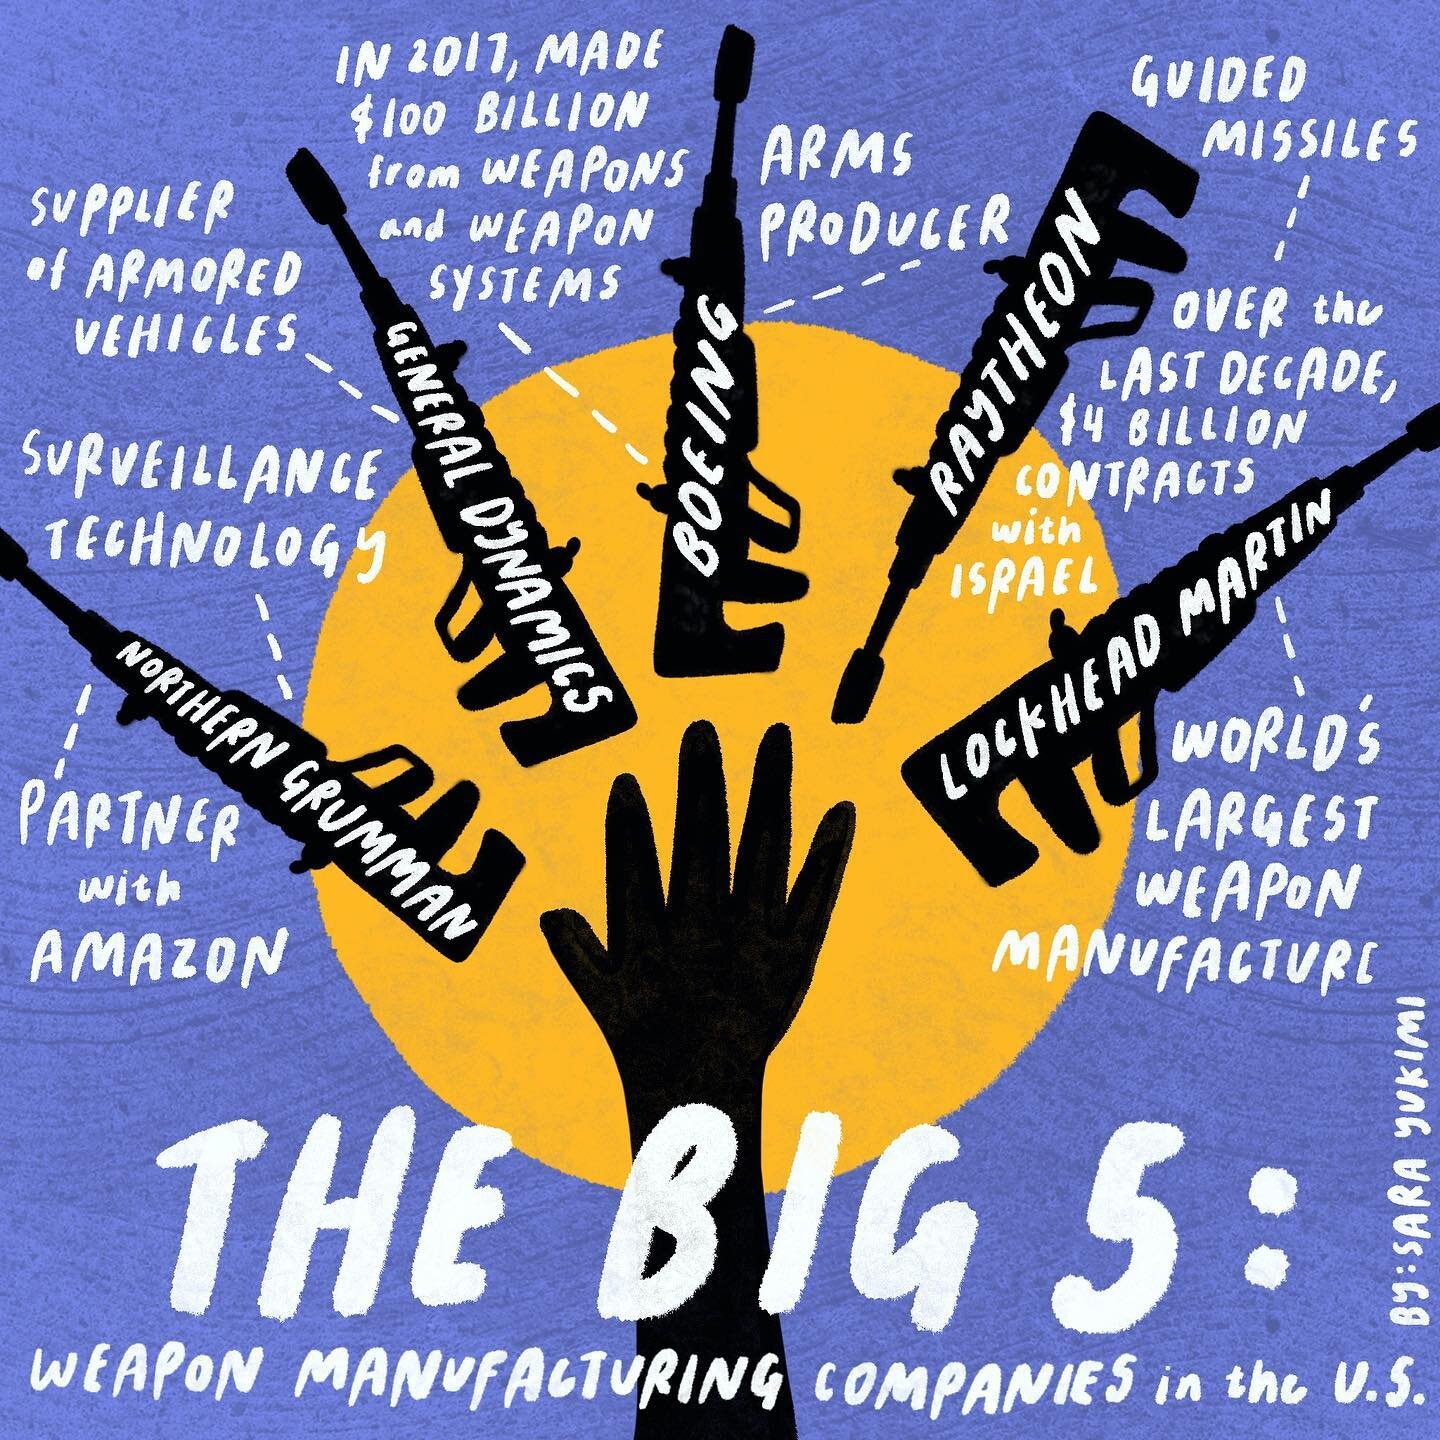 &lsquo;The Big 5&rsquo; are the 5 largest weapon manufacturing companies in the US. This includes Lockhead Martin, the world&rsquo;s largest weapon manufacturer, and Raytheon, which in the last decade, has had $4 billion dollars worth of contracts wi